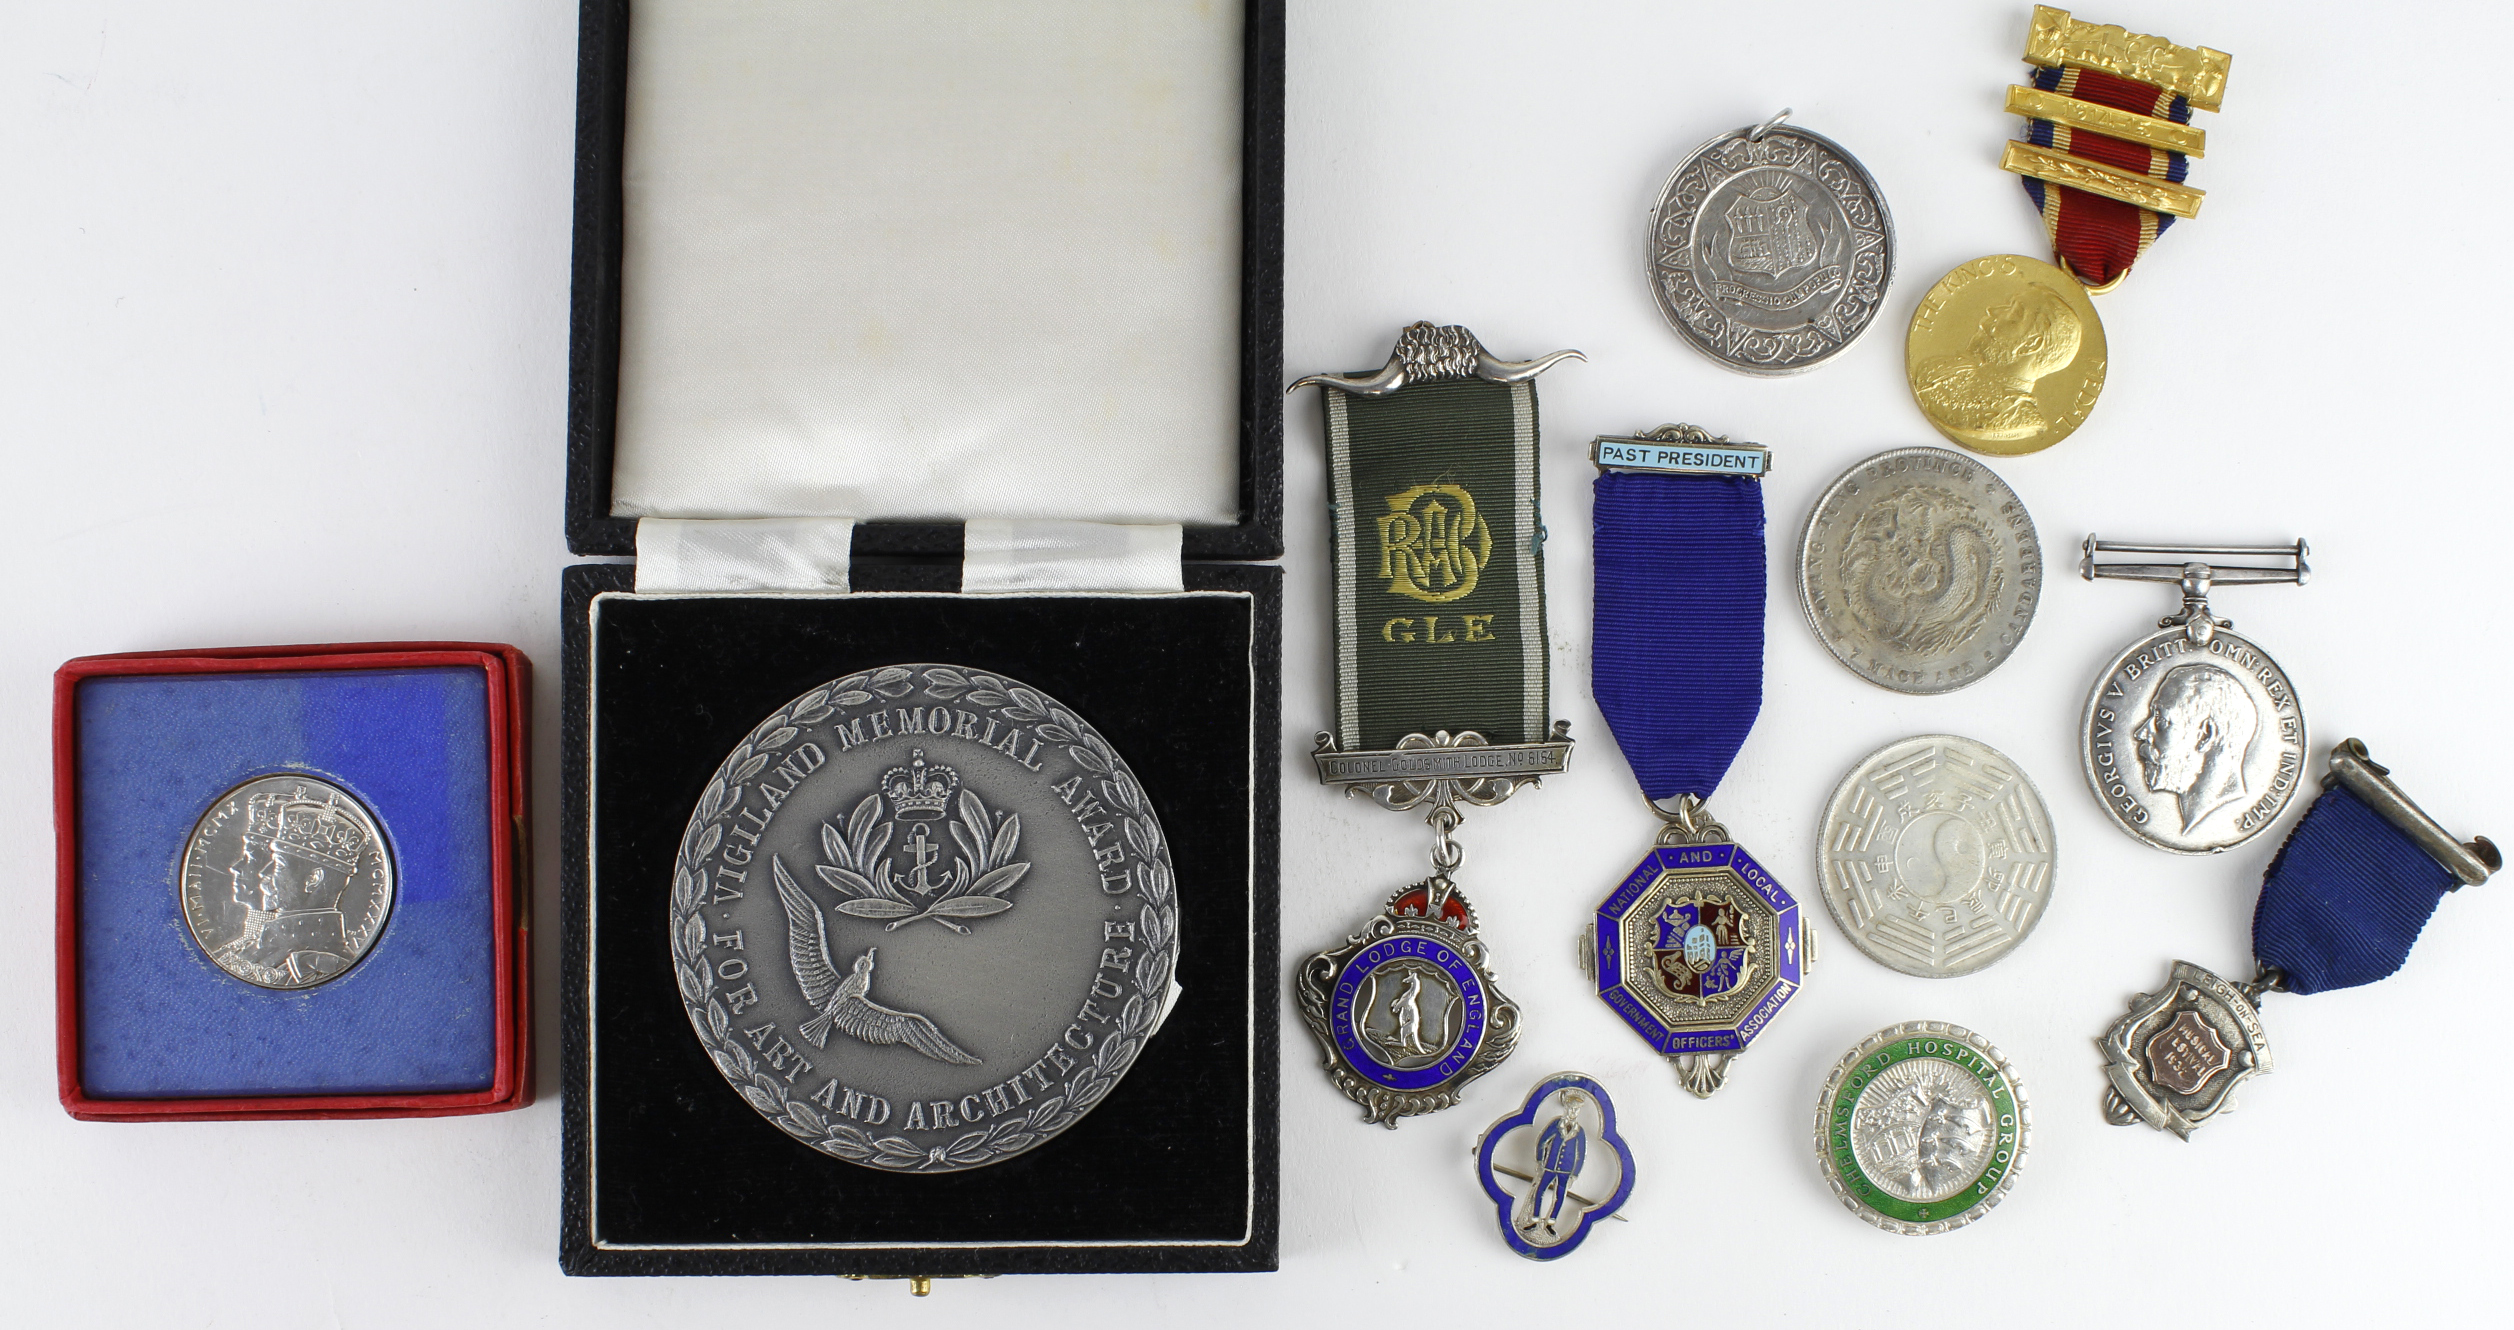 GB medals, badges etc. (12) mostly silver, 20thC, approx. 265g sterling. Note there are two